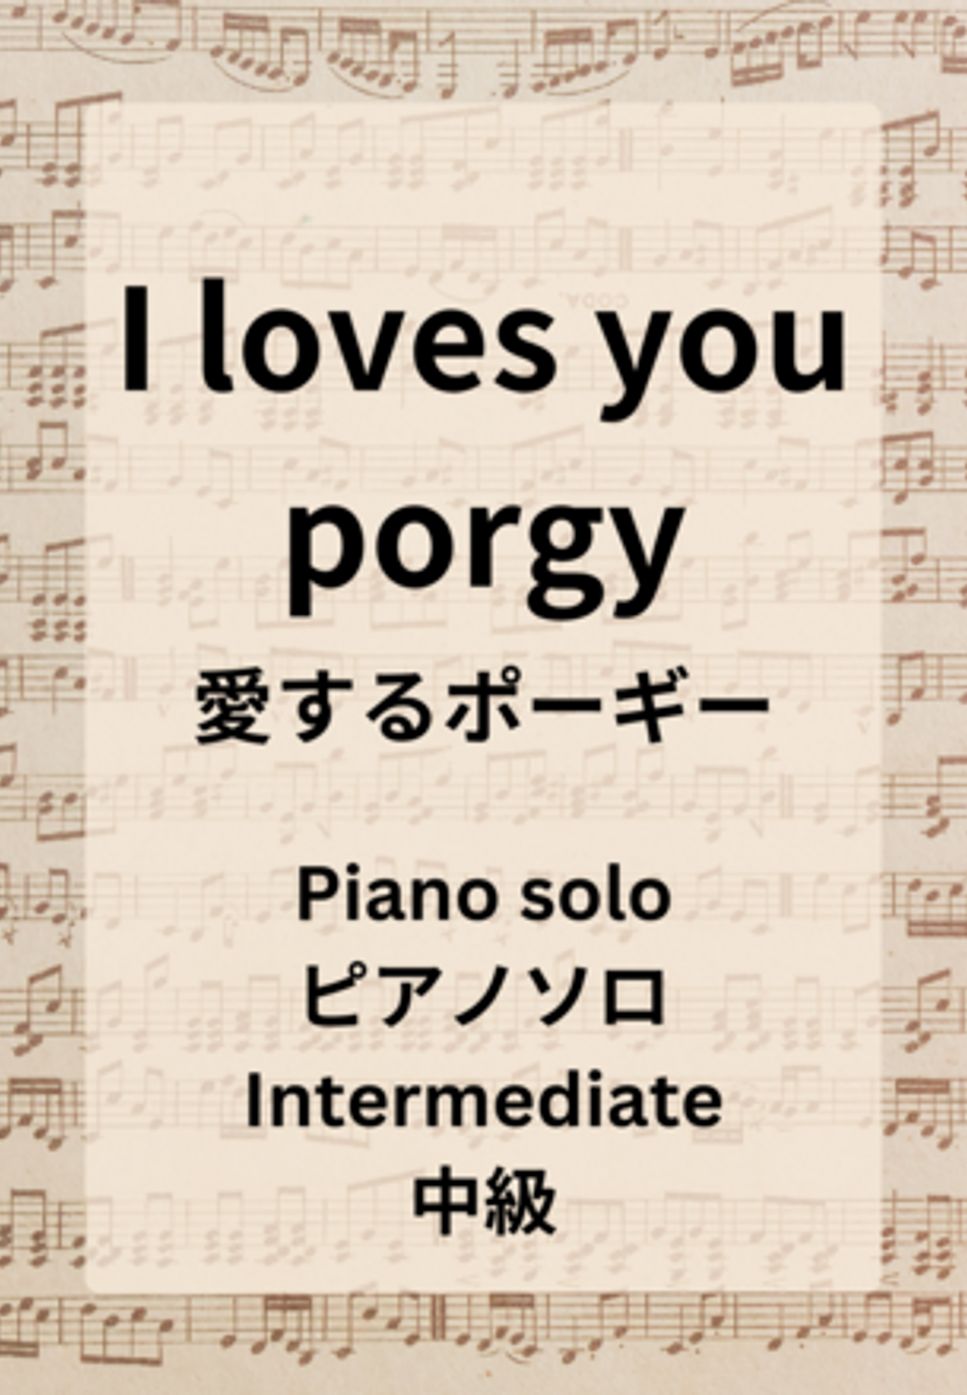 George Gershwin - I loves you porgy（愛するポーギー） by Hiromiki Ono